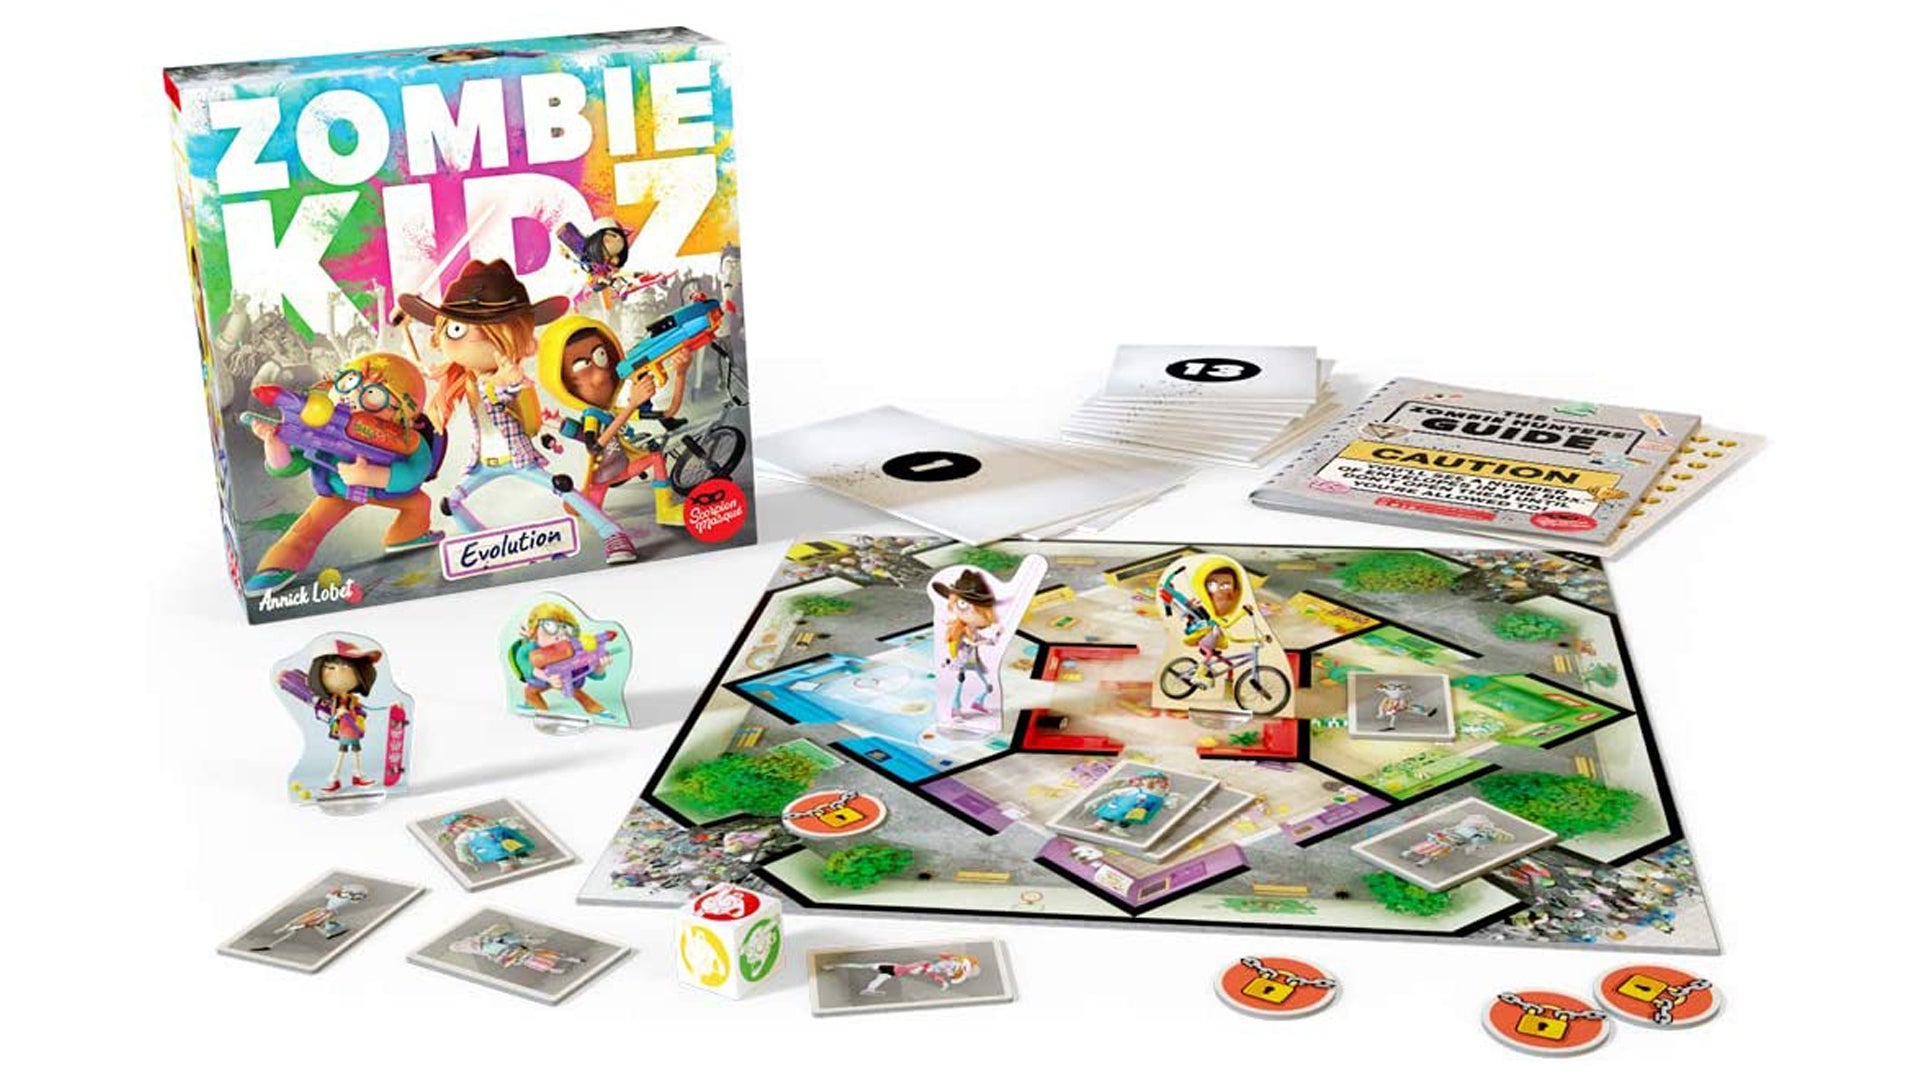 Gatwick Games The Golfing Dead - Best New Zombie Card Game - Top Family  Games for 2 to 6 Players - Great for Adults, Couples, Teens, and Kids Ages  7 Years and